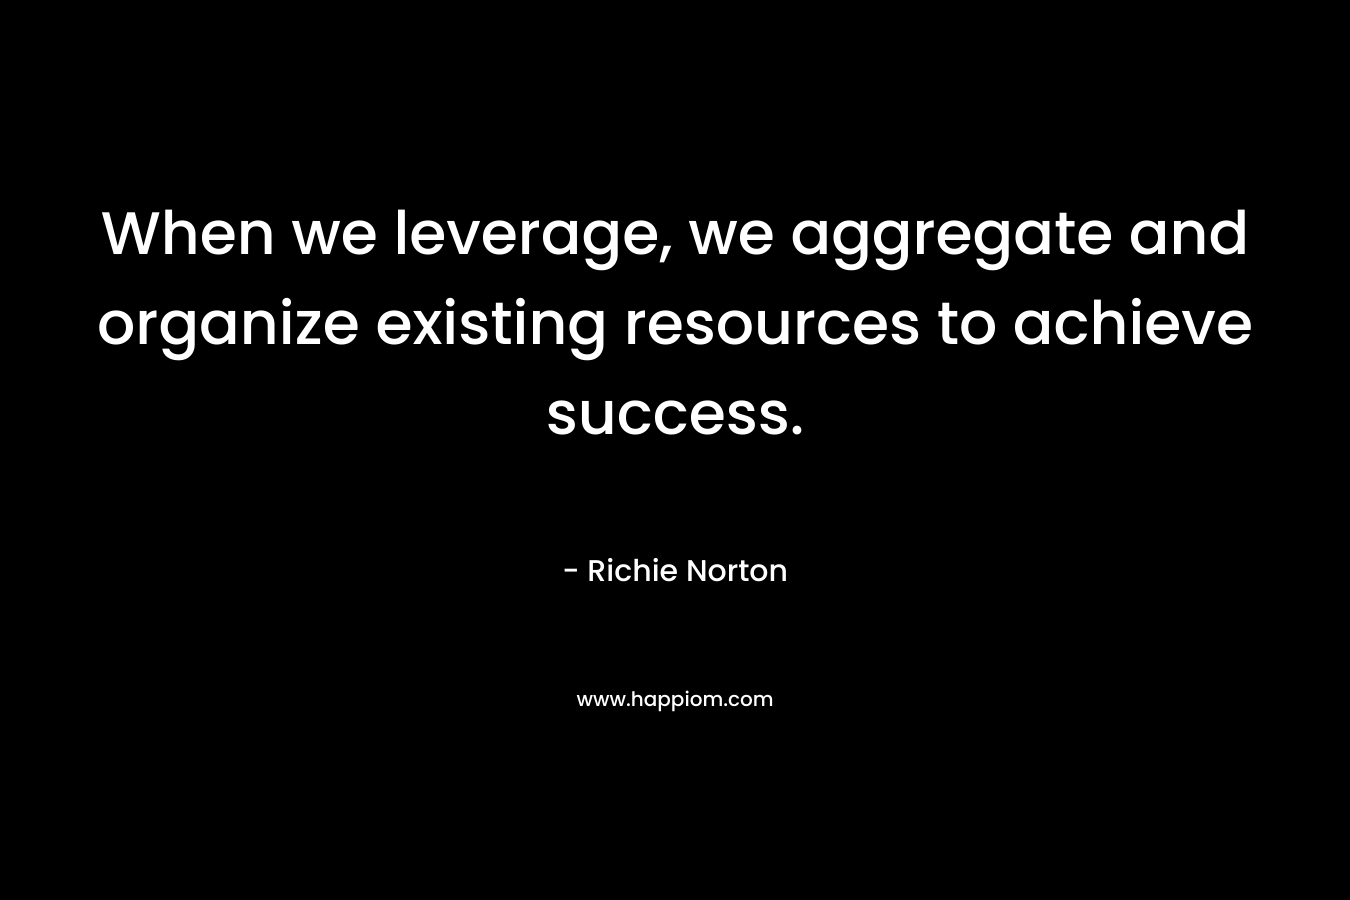 When we leverage, we aggregate and organize existing resources to achieve success. – Richie Norton